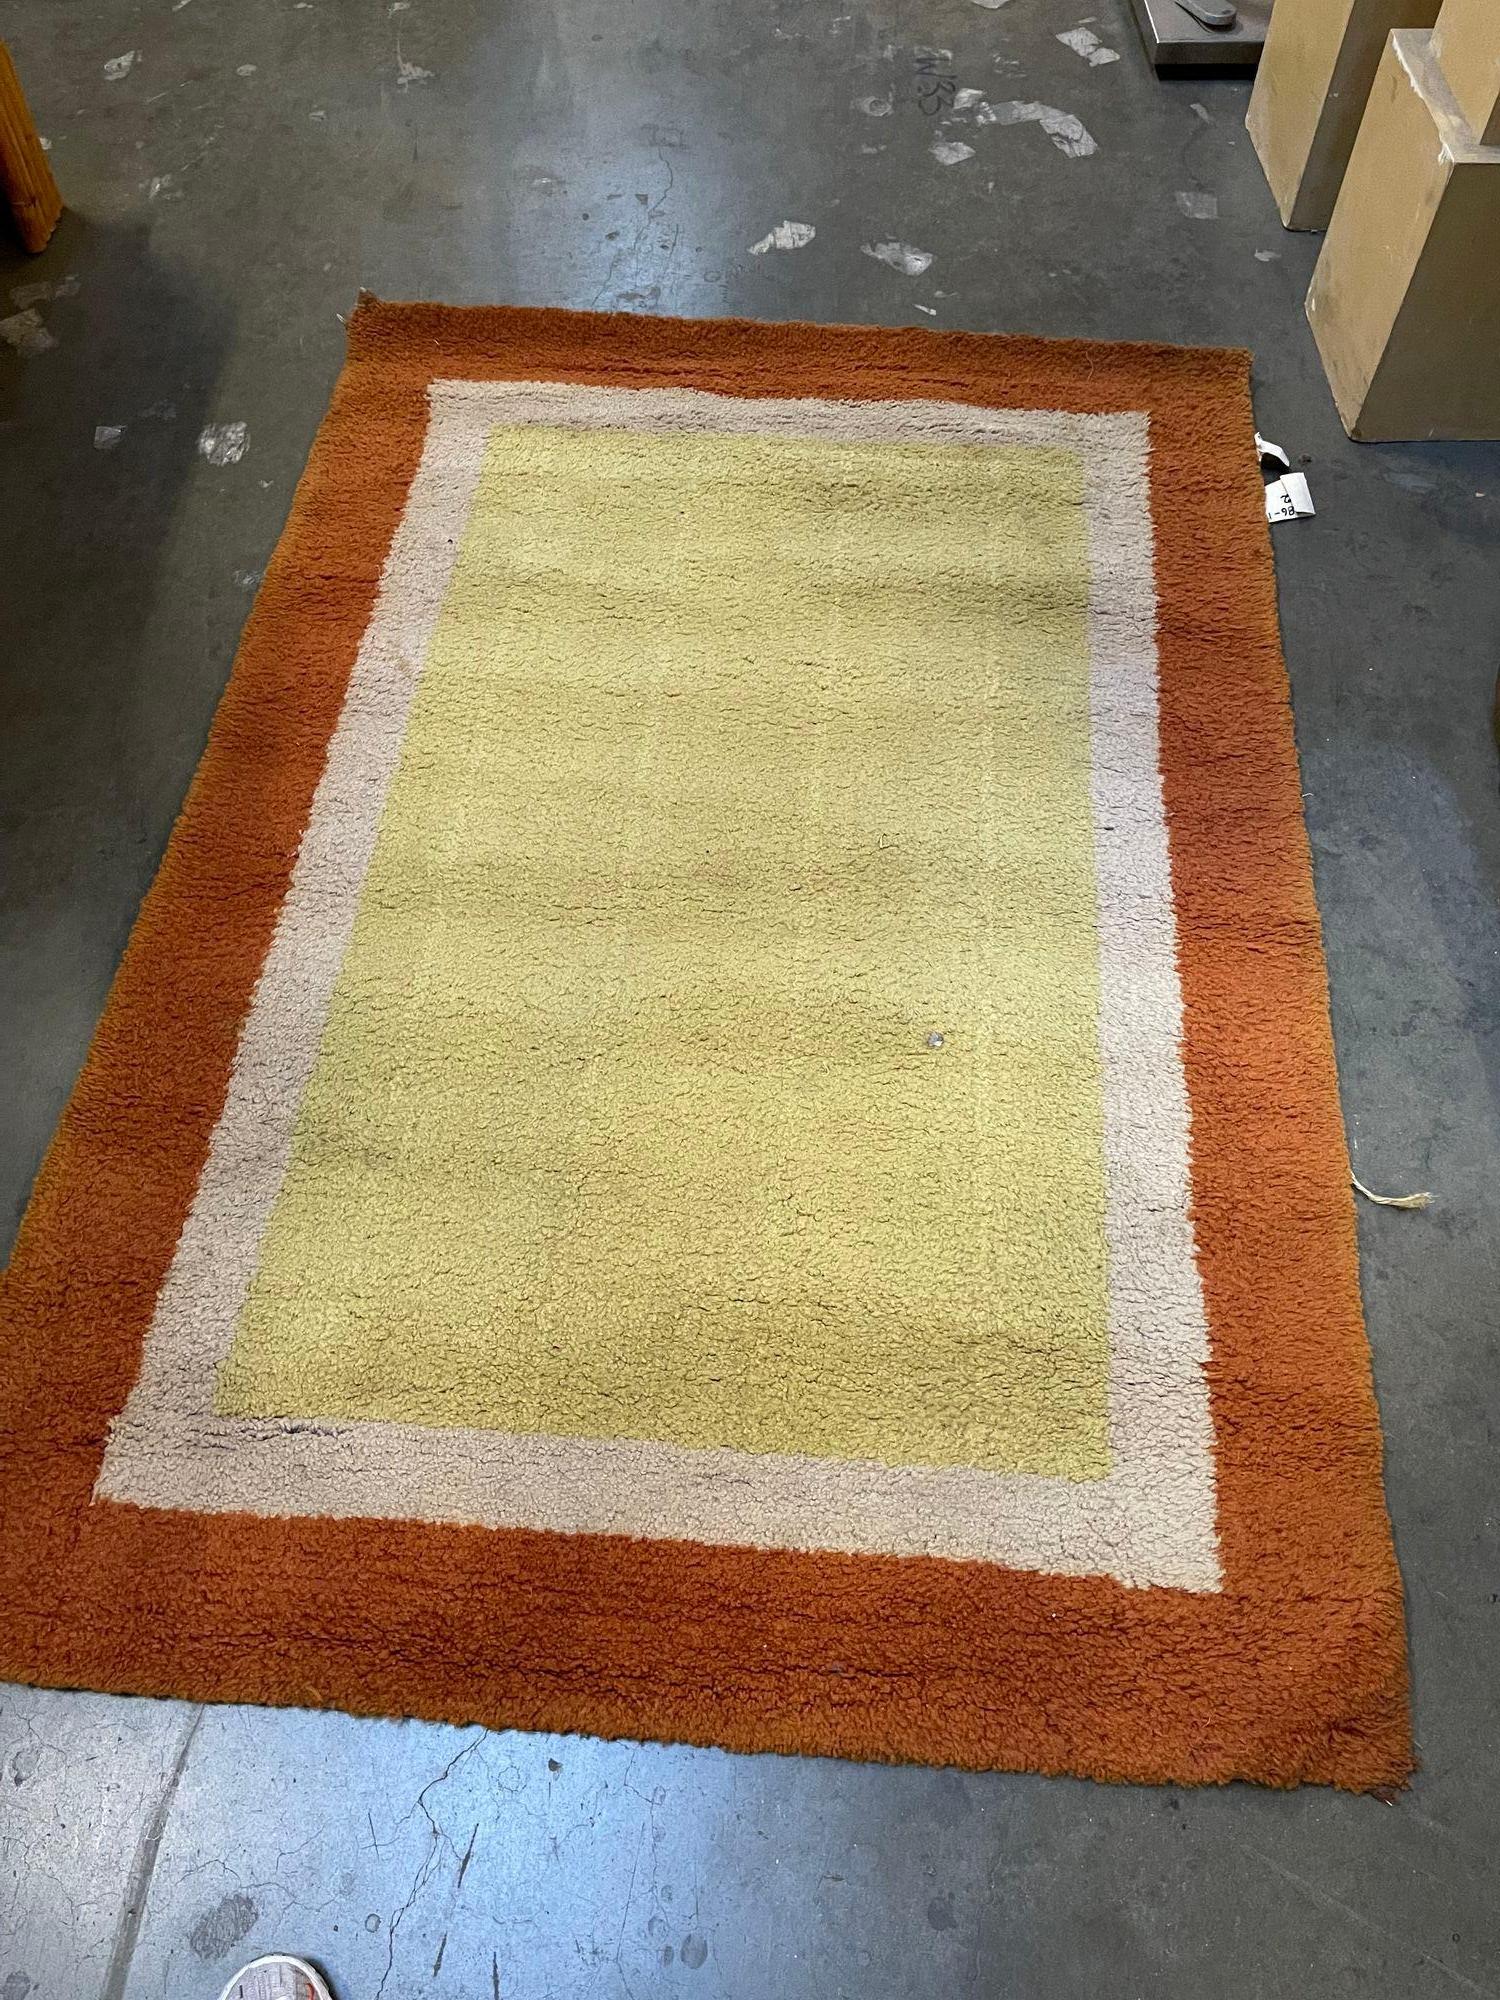 Post Modern Geometric Tricolor Scandinavian Shag Rug In Excellent Condition For Sale In Van Nuys, CA